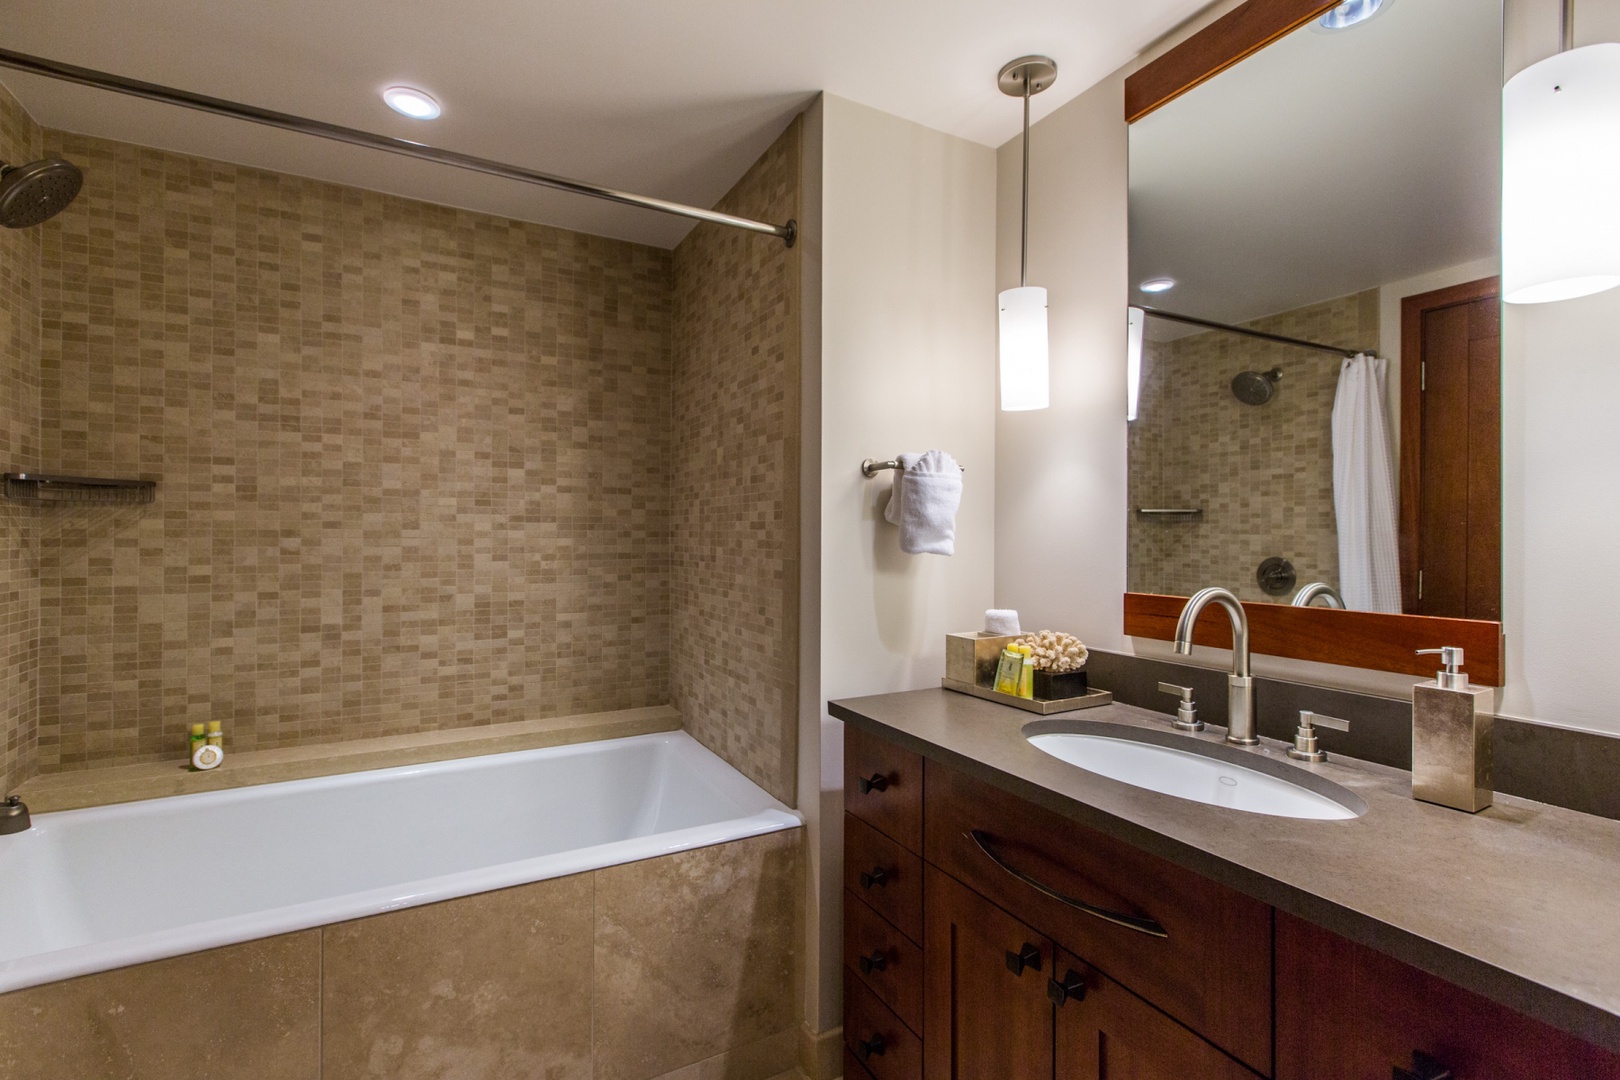 Kapolei Vacation Rentals, Ko Olina Beach Villa B604 - Second bedroom ensuite with a tub and a single sink